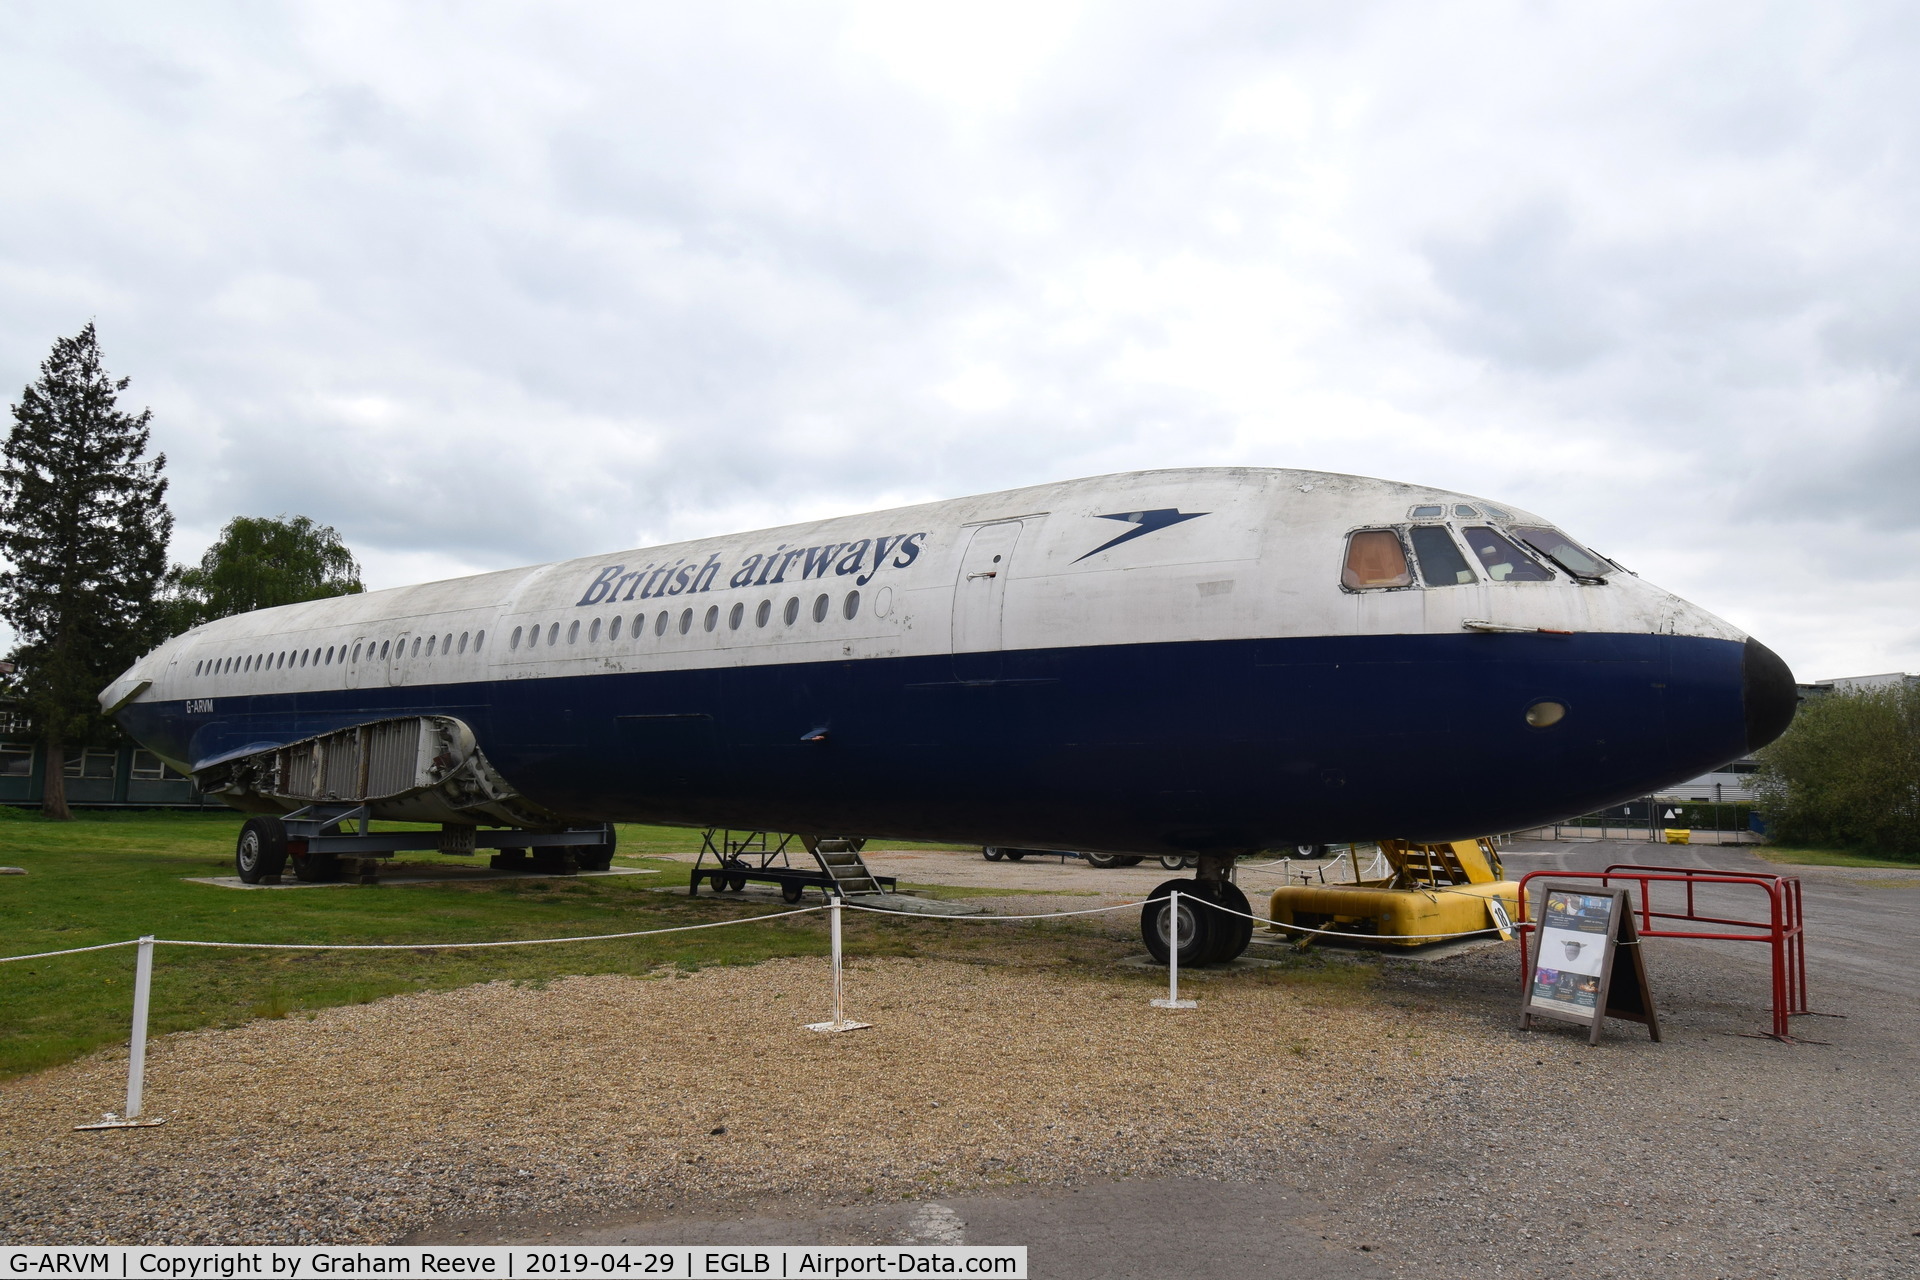 G-ARVM, 1964 Vickers VC10 Srs 1101 C/N 815, On display at the Brooklands Museum.